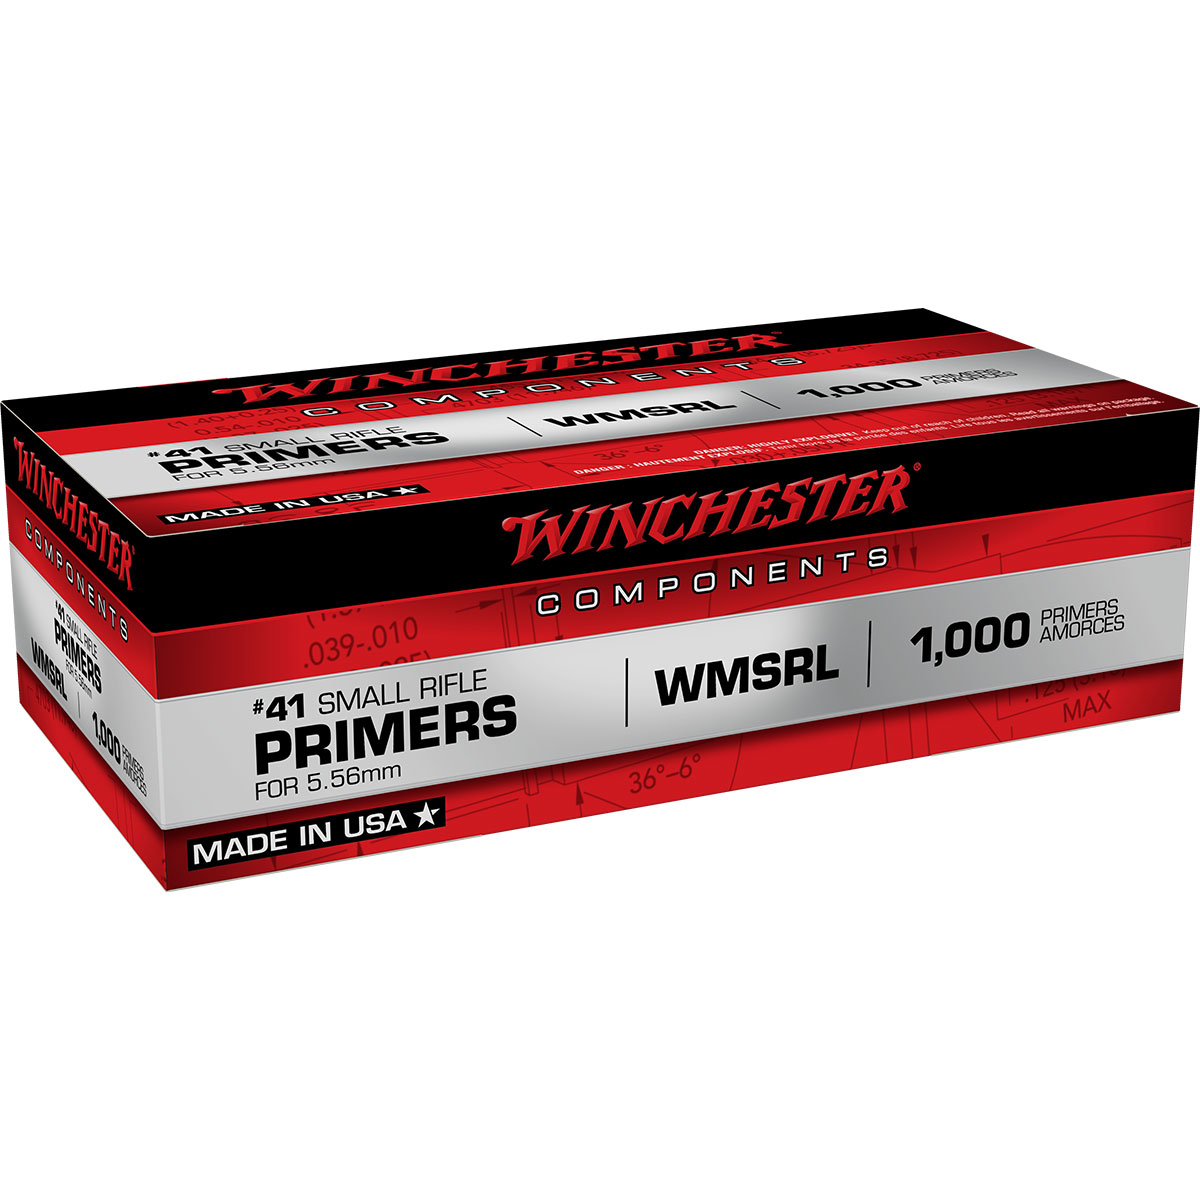 WINCHESTER - SMALL RIFLE MILITARY PRIMERS FOR 5.56MM NATO AMMO